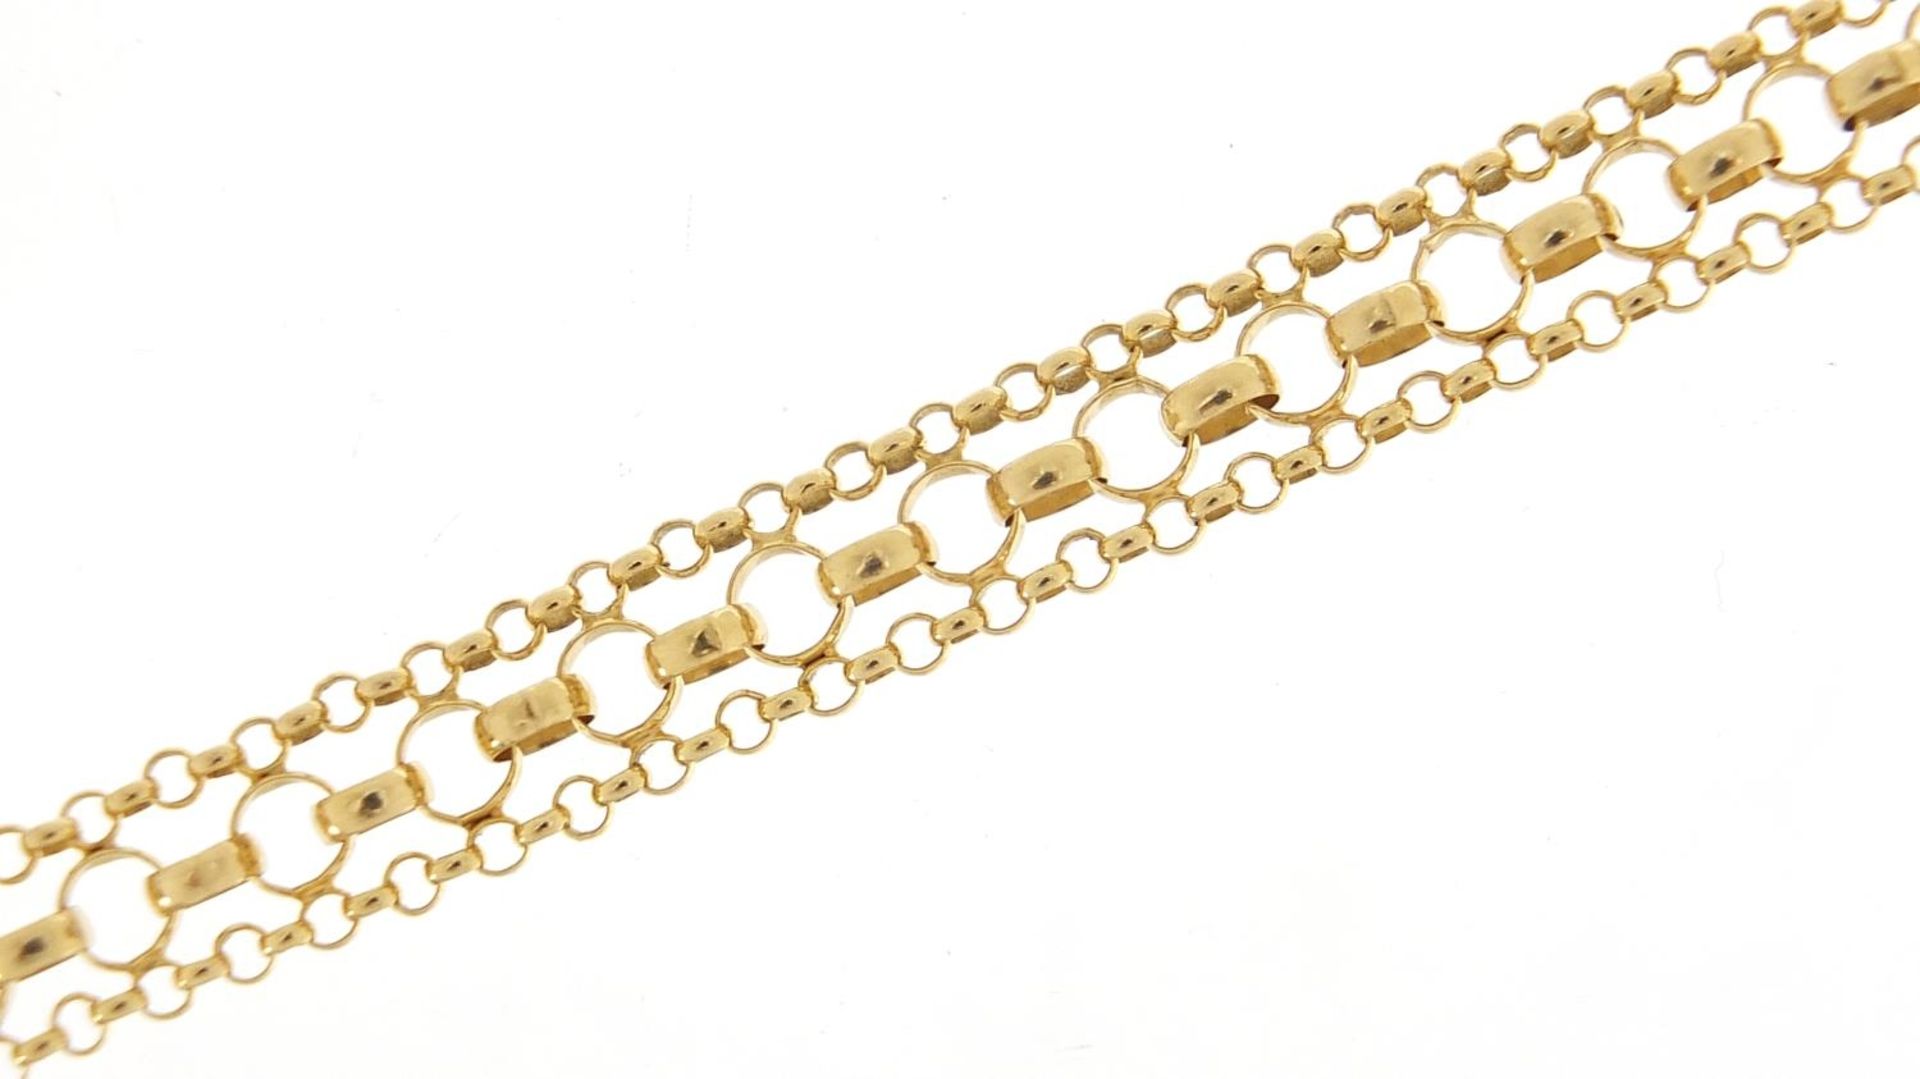 9ct gold multi link bracelet, 17cm in length, 6.0g :For Further Condition Reports Please Visit Our